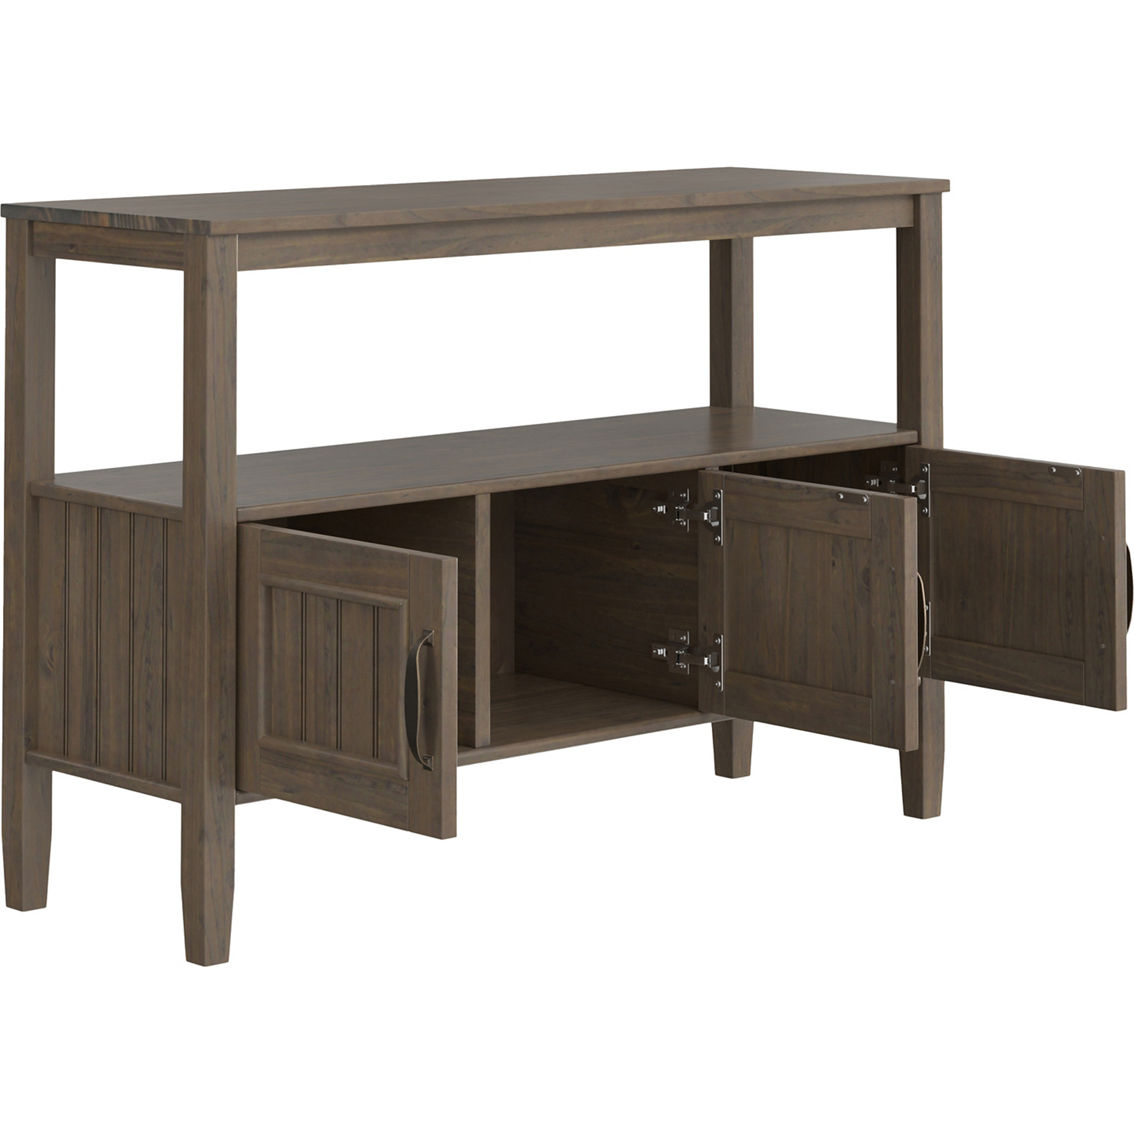 Simpli Home Lev Solid Wood Console Table - Image 3 of 4